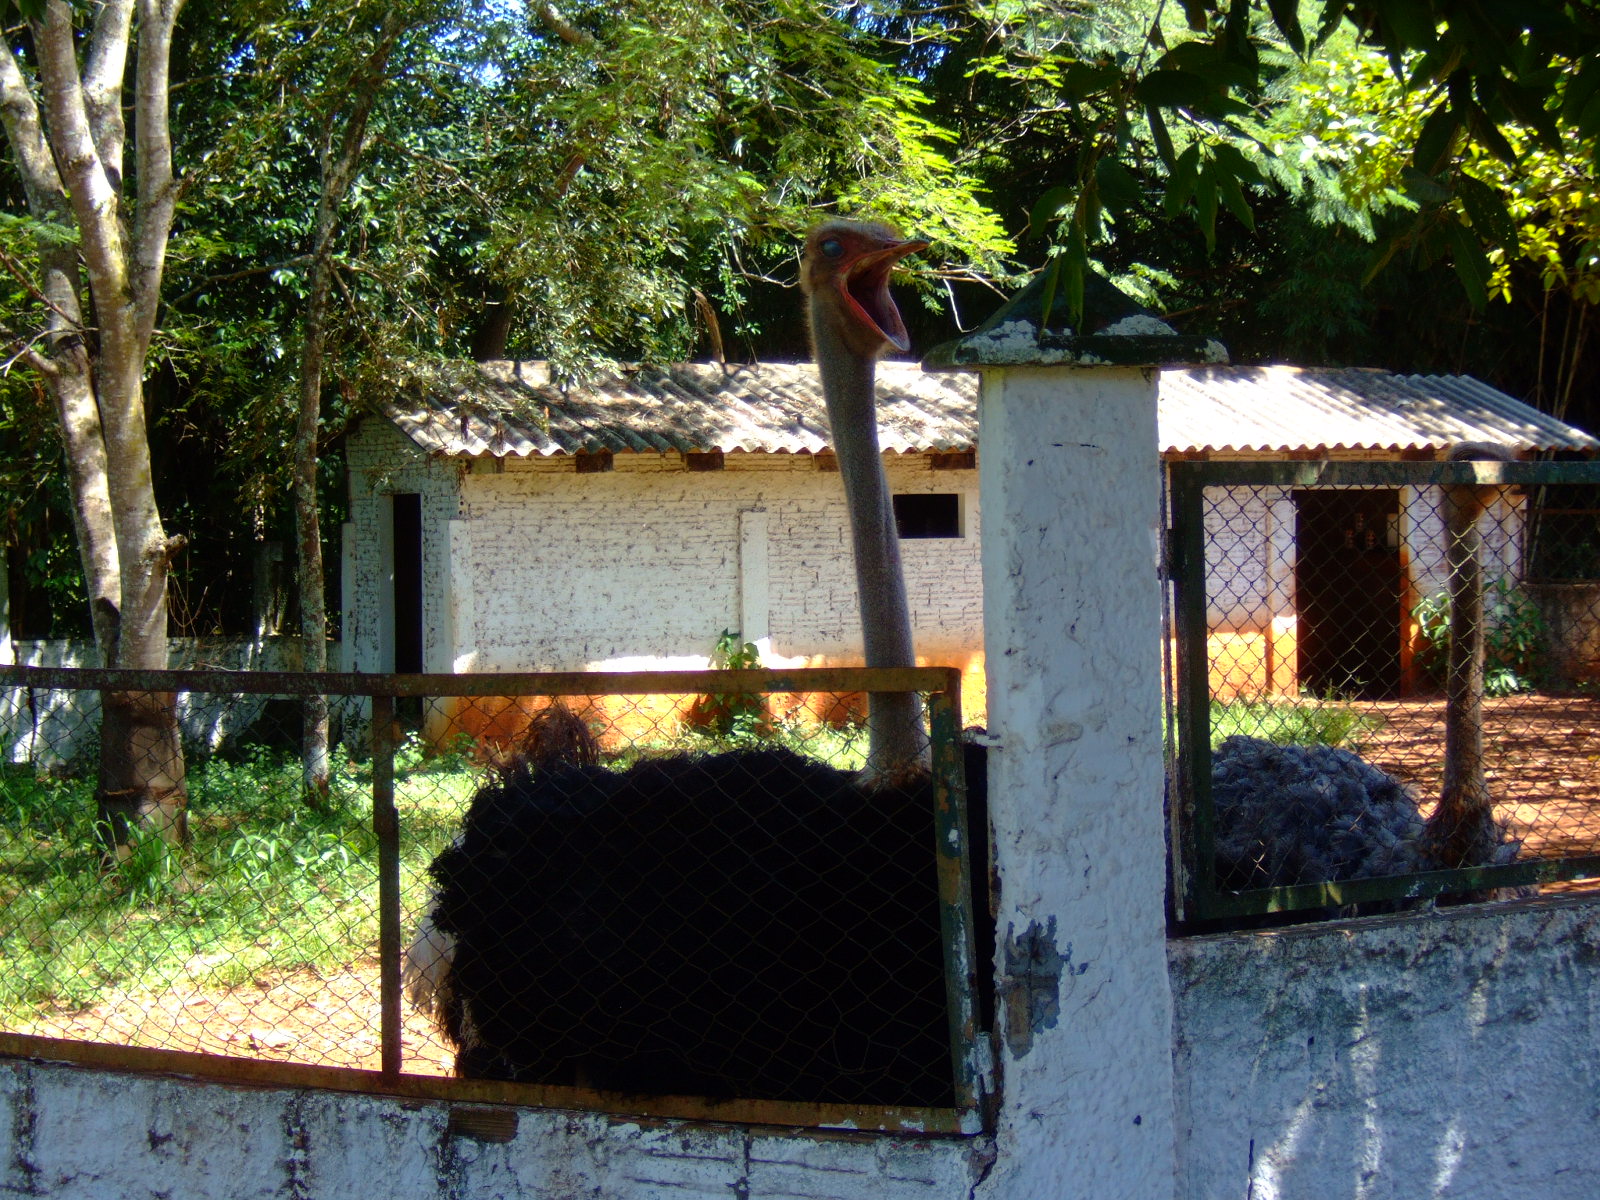 a large animal standing behind a gated enclosure